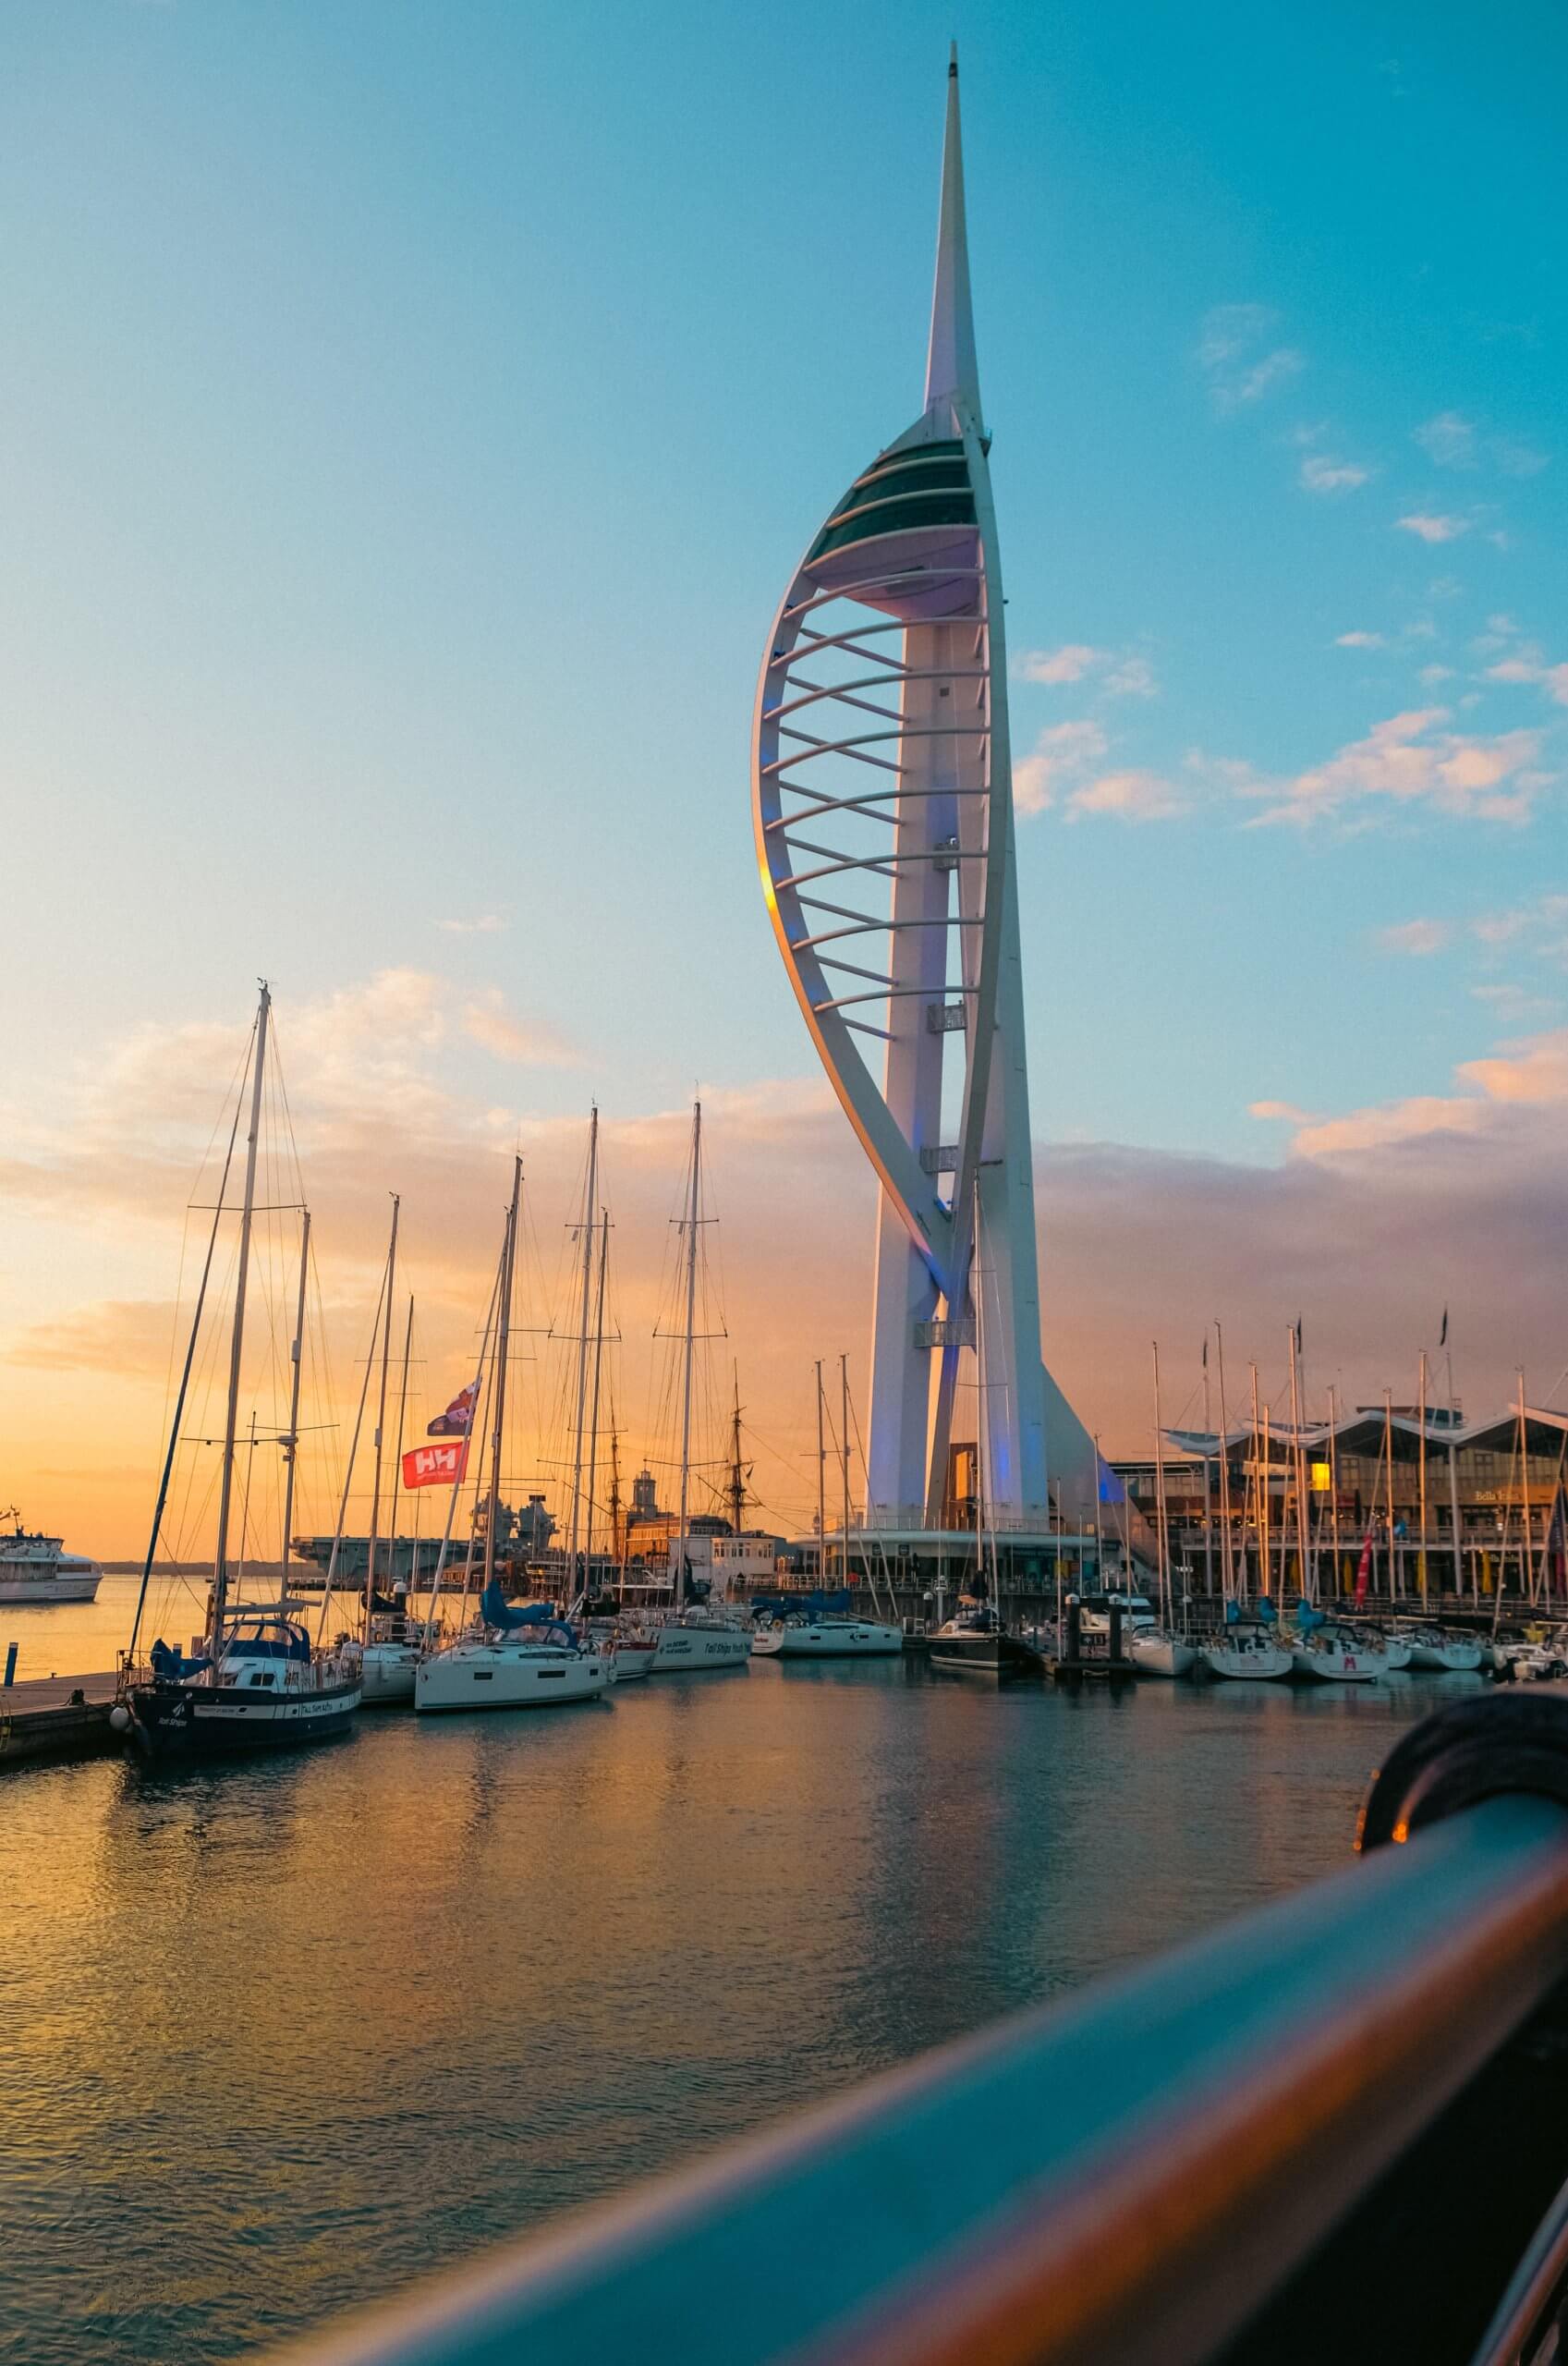 Spinnaker Tower in Hampshire